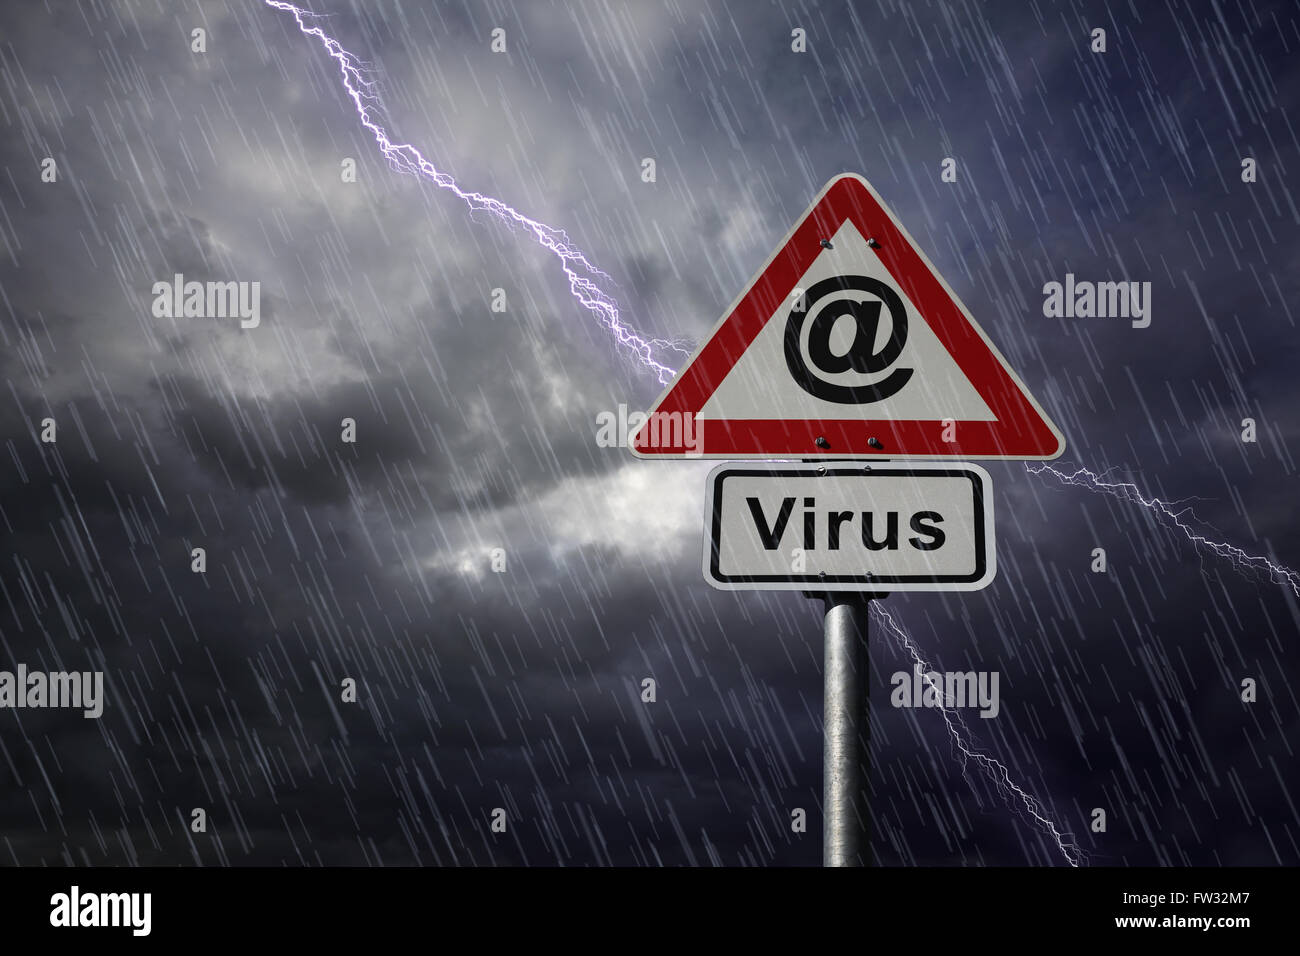 @ symbol and Virus road signs againt a rainy sky with lightning Stock Photo